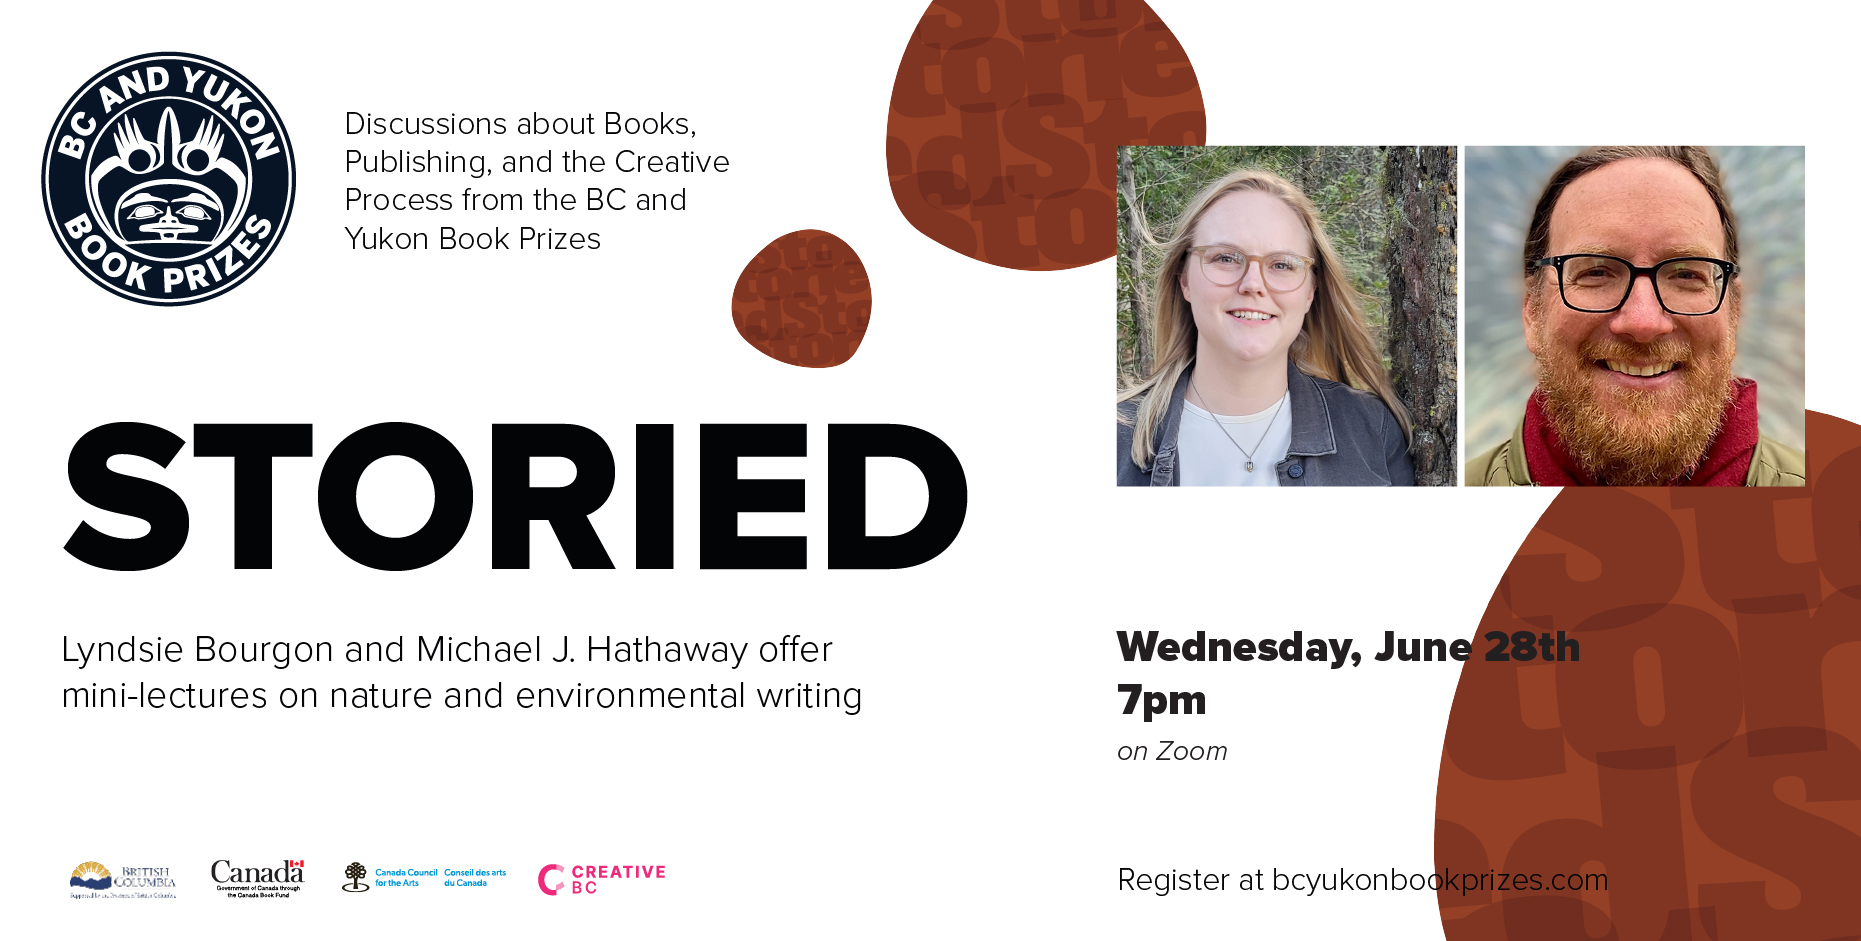 Storied: Nature and Environmental Writing with Lyndsie Bourgon and Michael J. Hathaway